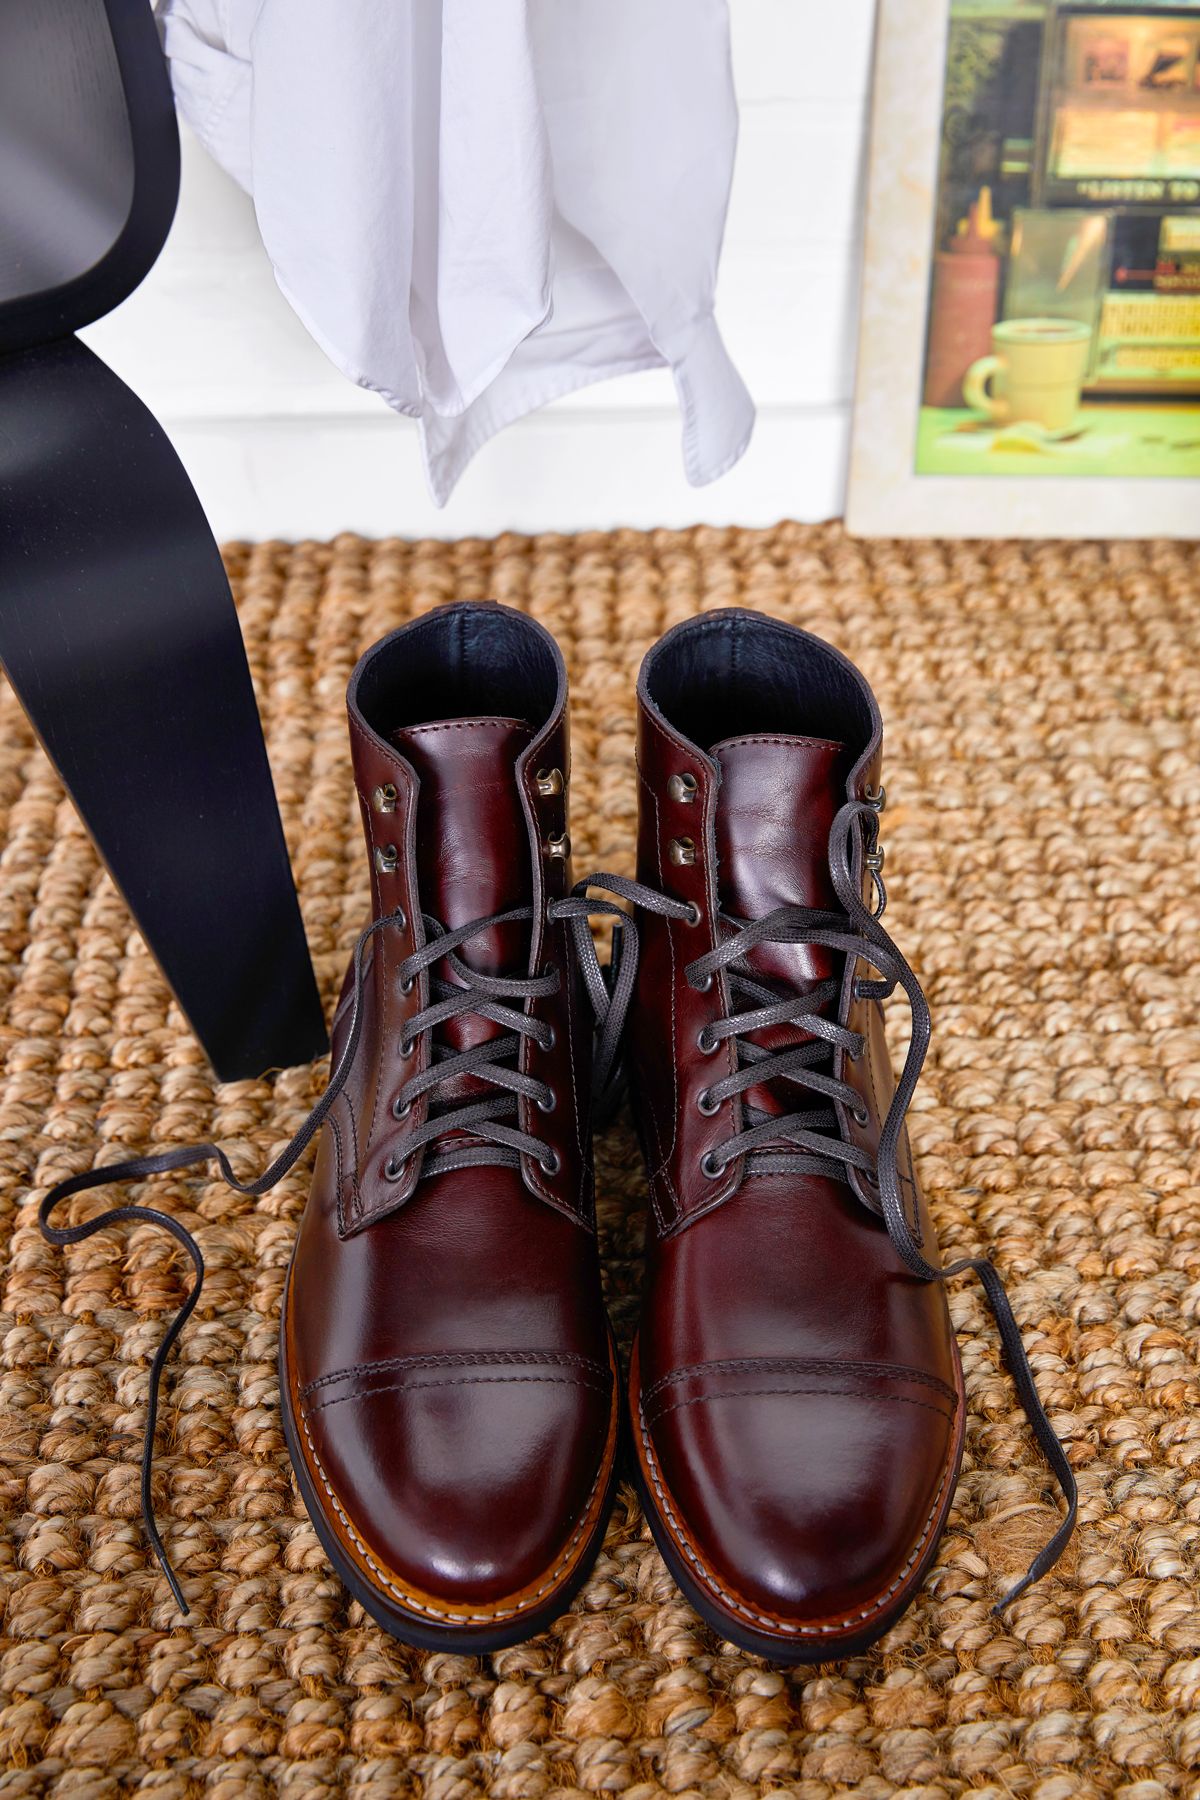 Buy > thursday boots old english > in stock